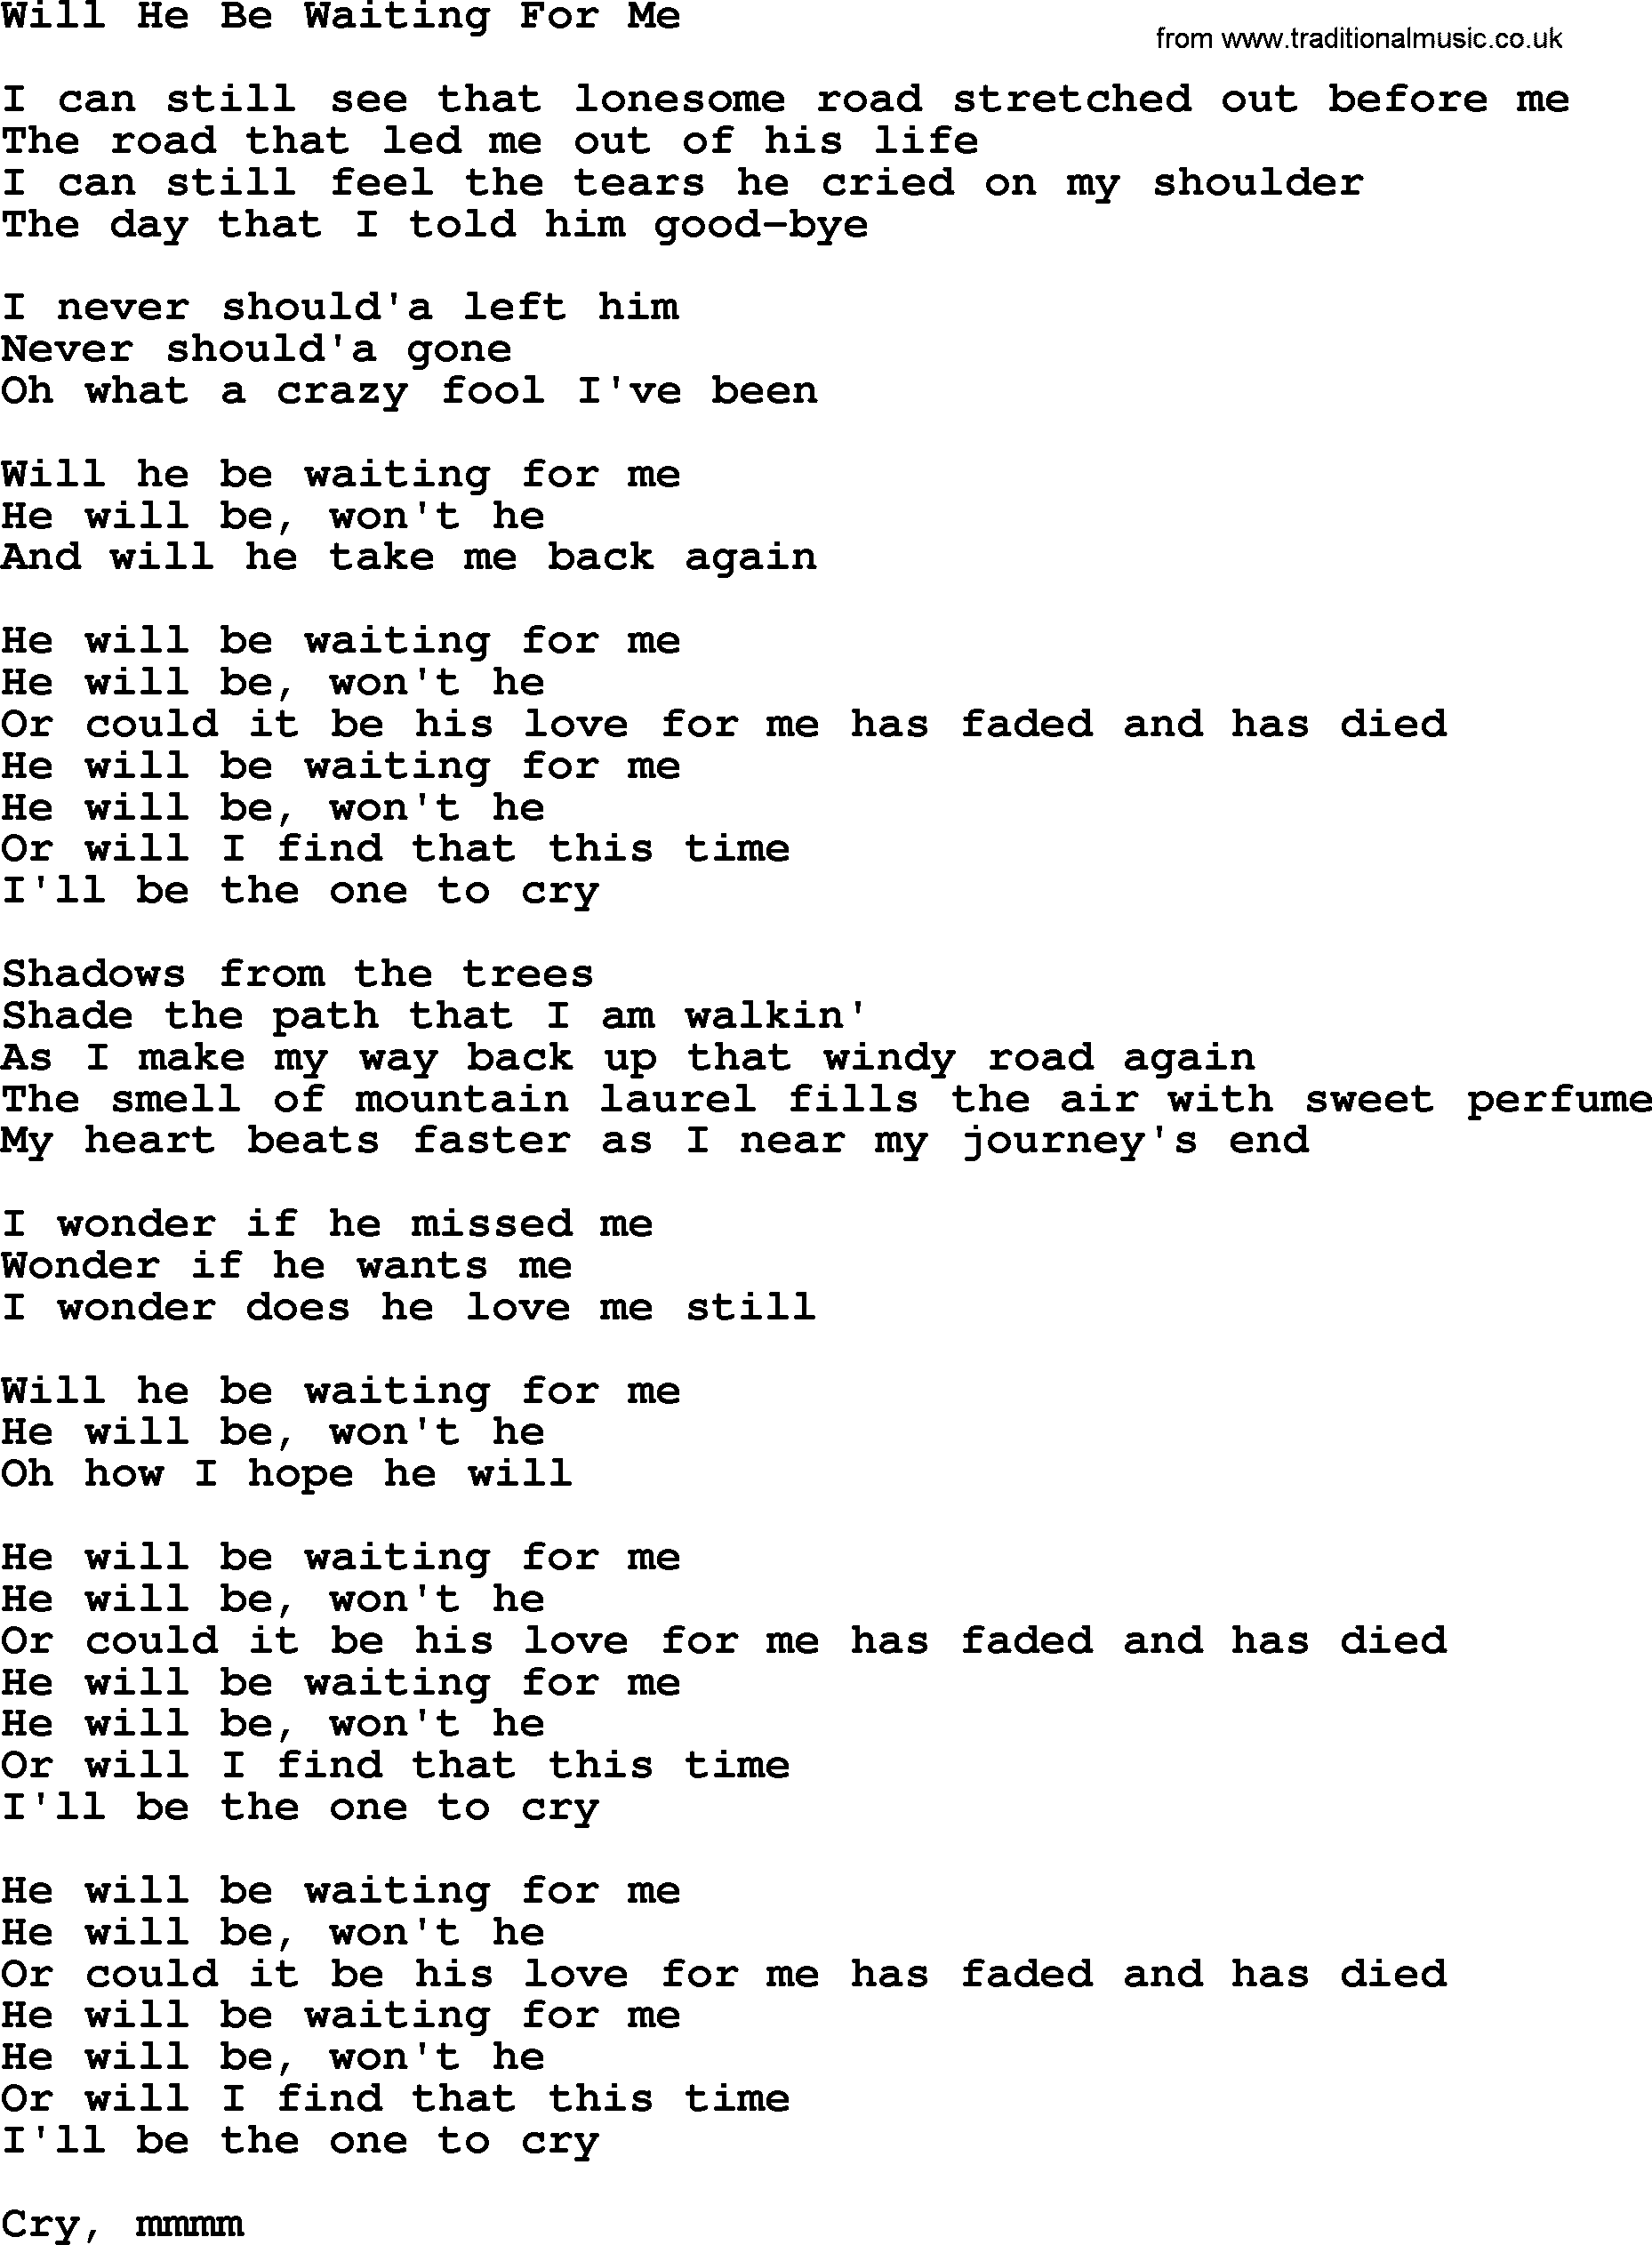 Dolly Parton song: Will He Be Waiting For Me, lyrics